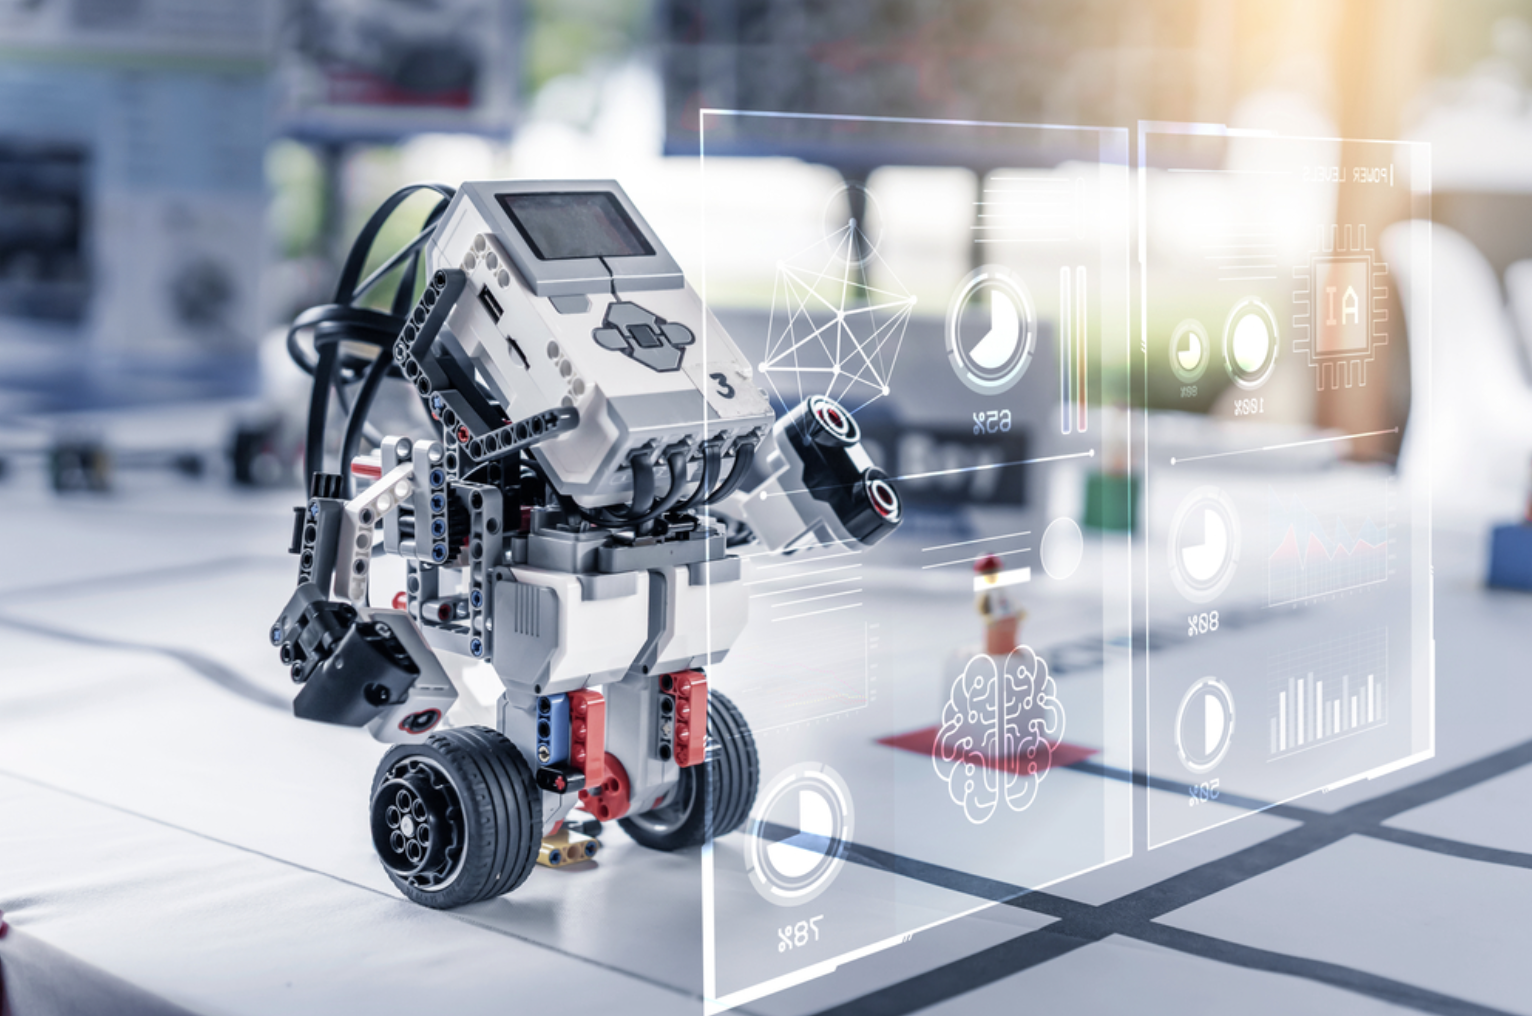 7 Ways to Implement Smart Robotics in Public Safety